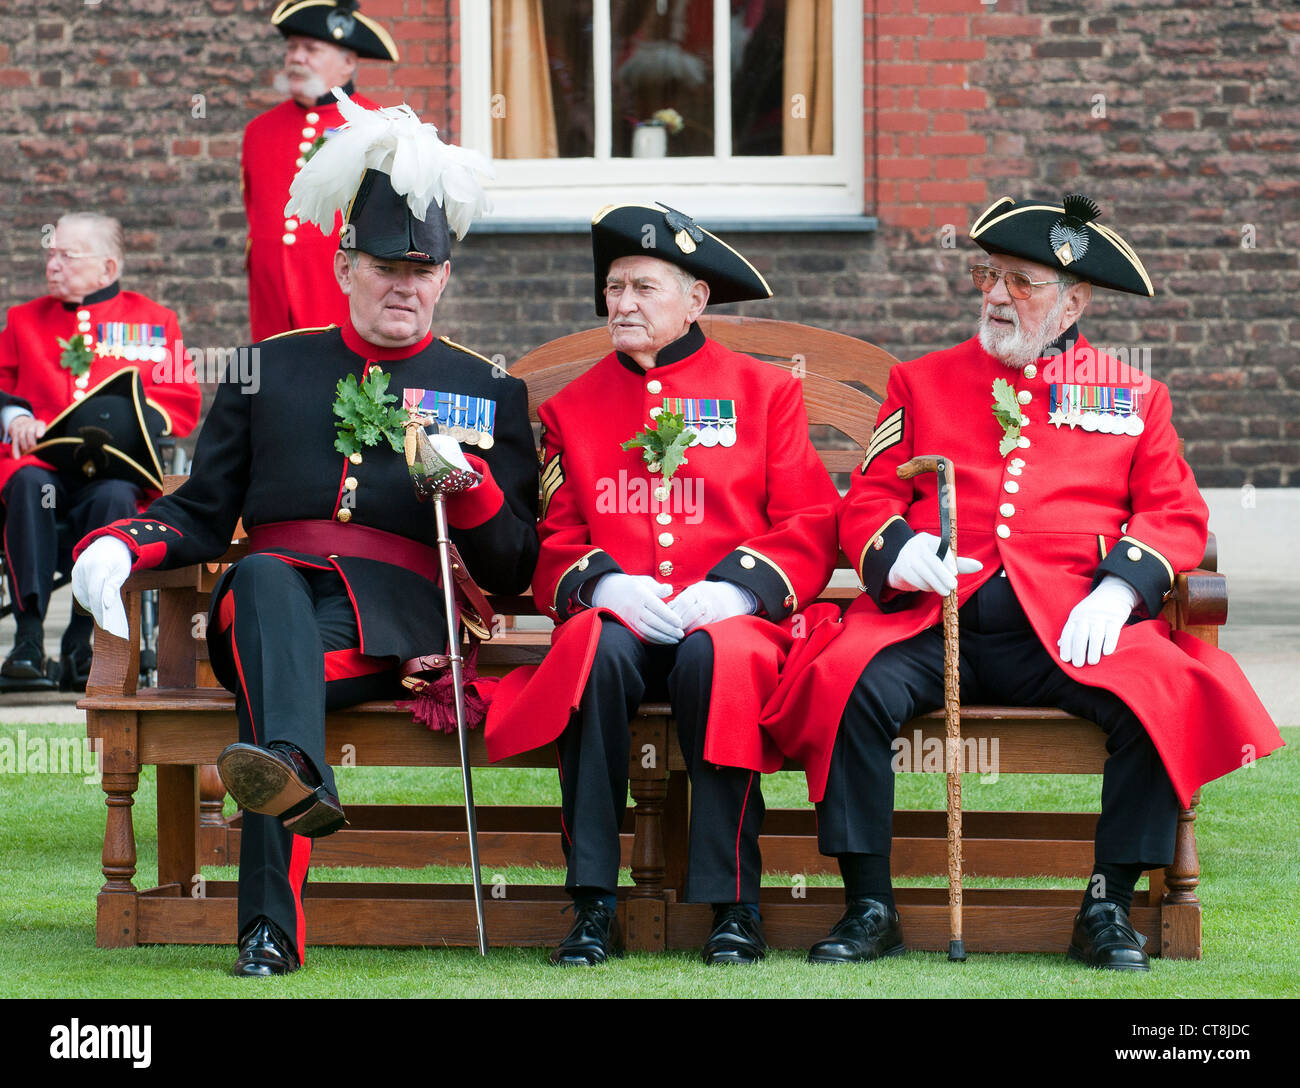 The annual 'Founders Day' parade at the Royal Hospital in Chelsea